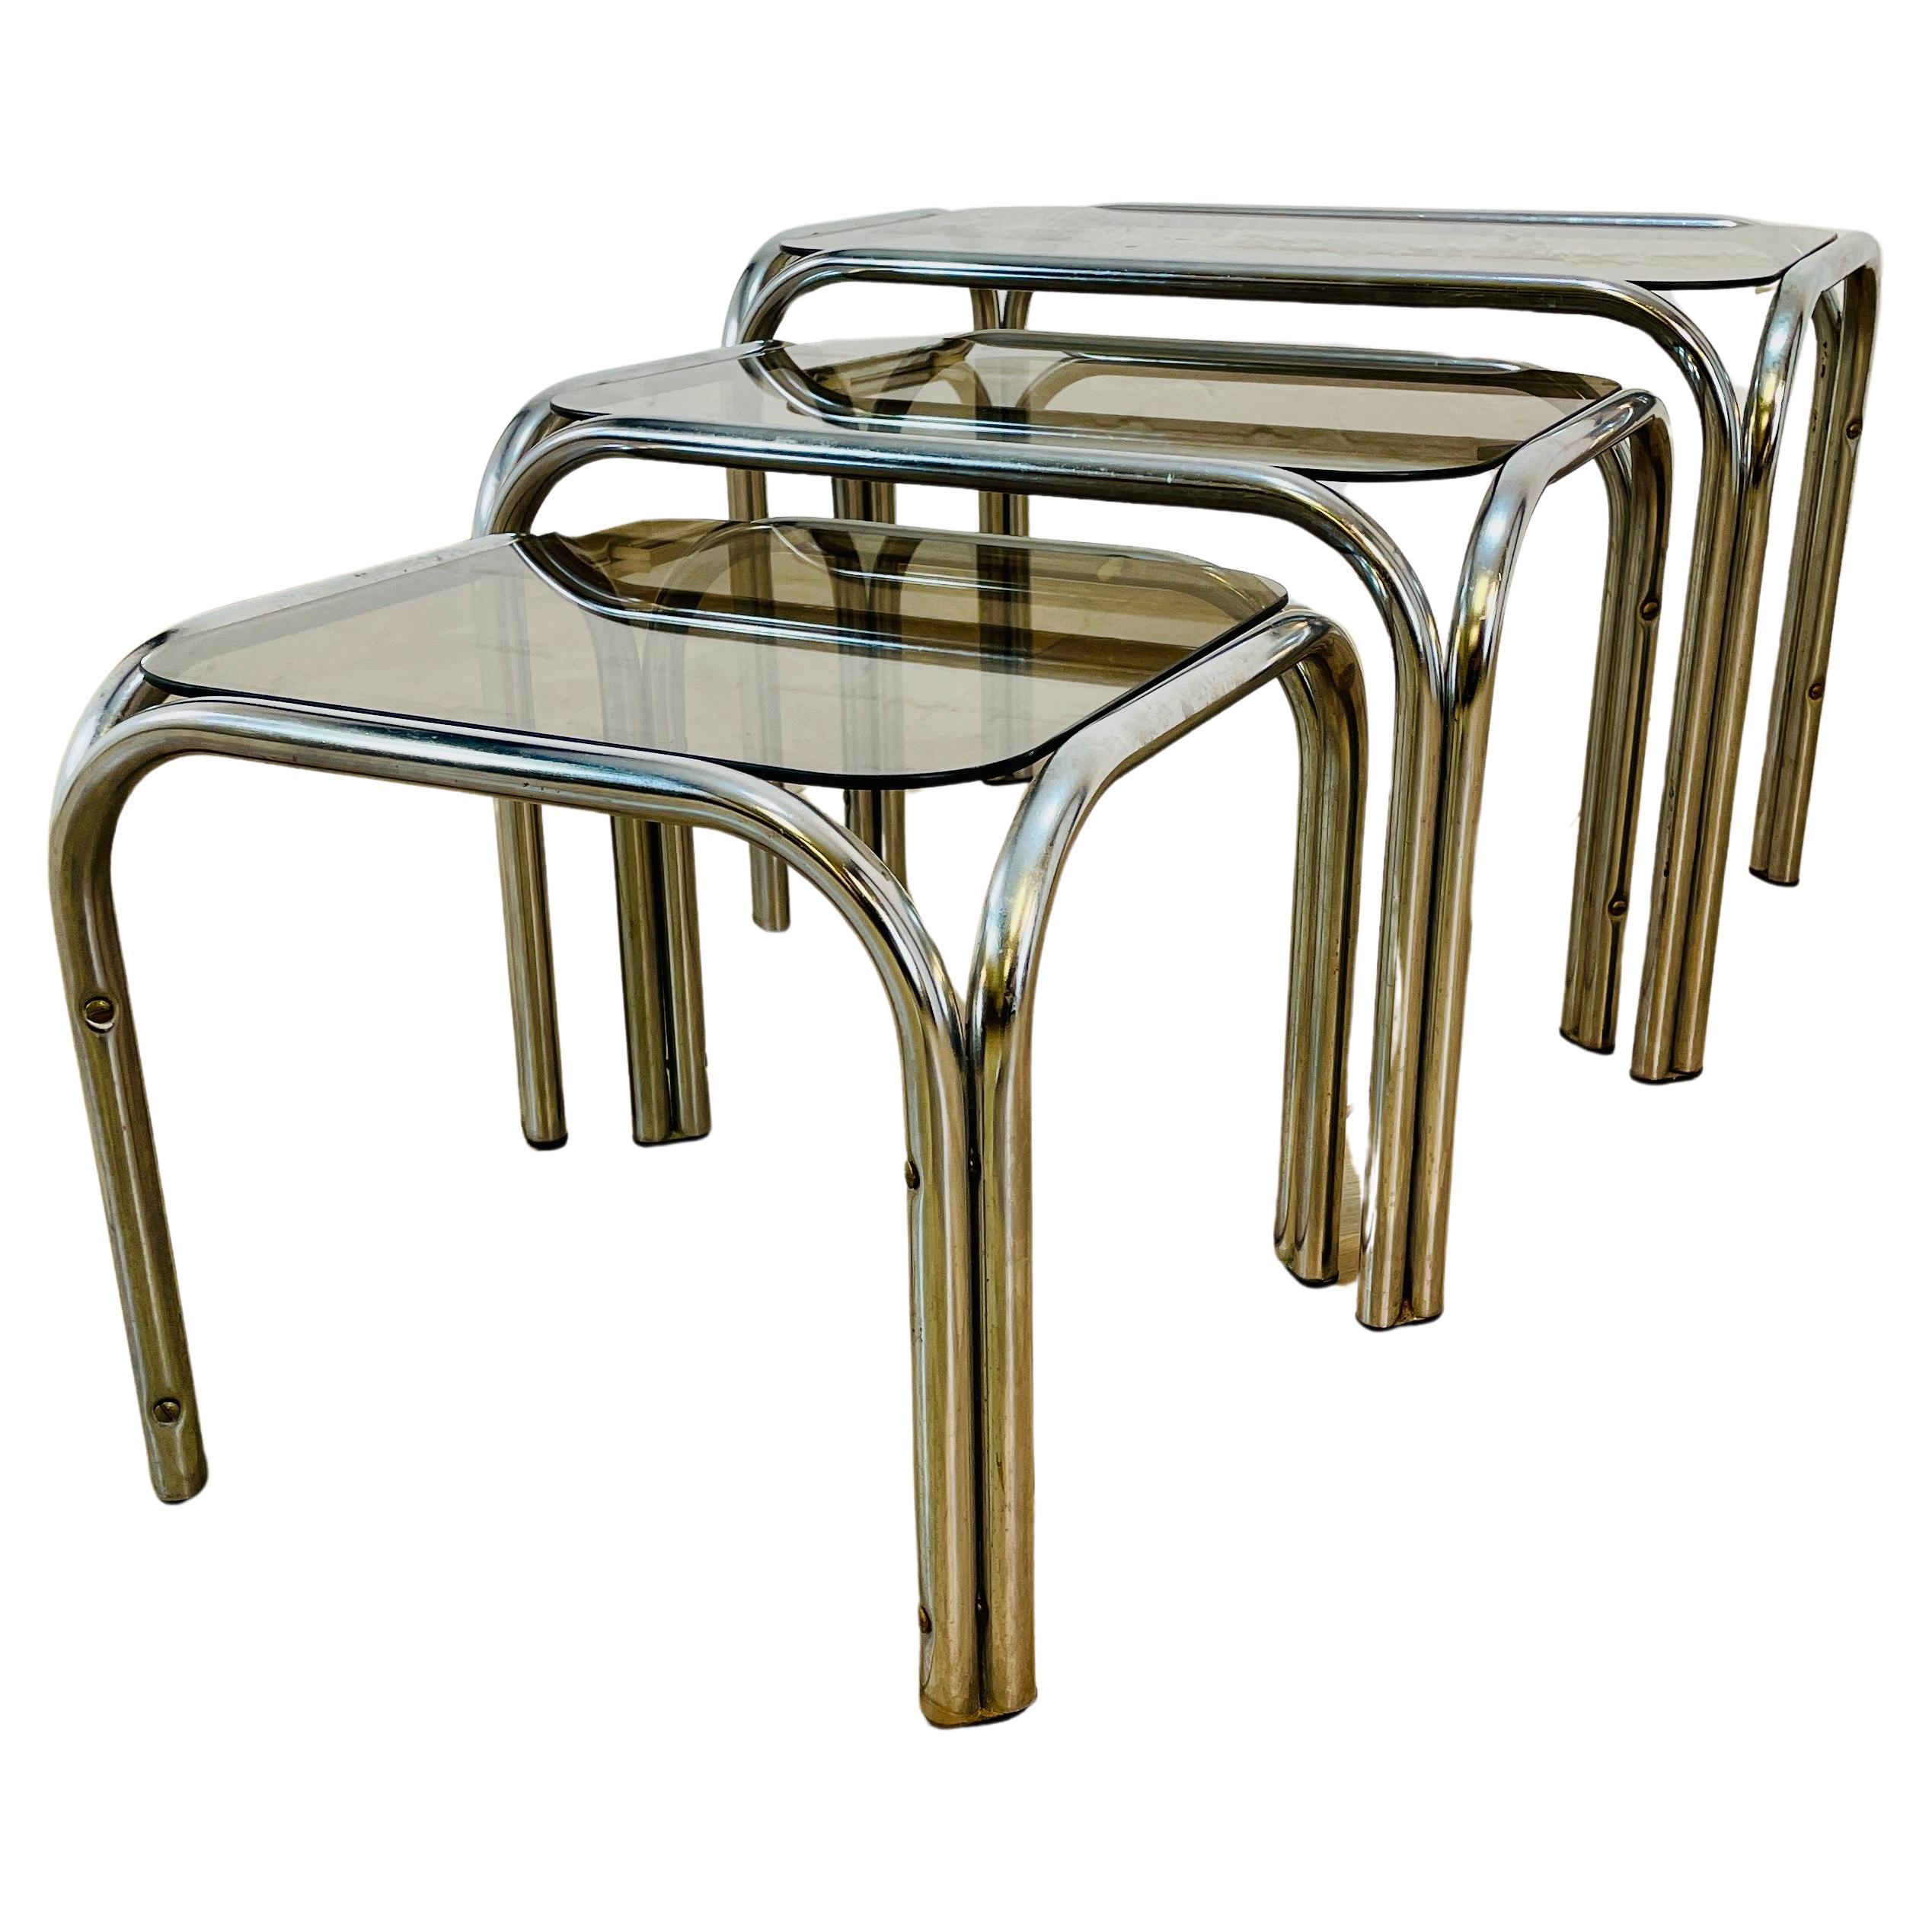 Vintage Smoked Glass + Chrome Nest of Tables, Set of 3, 1970s For Sale